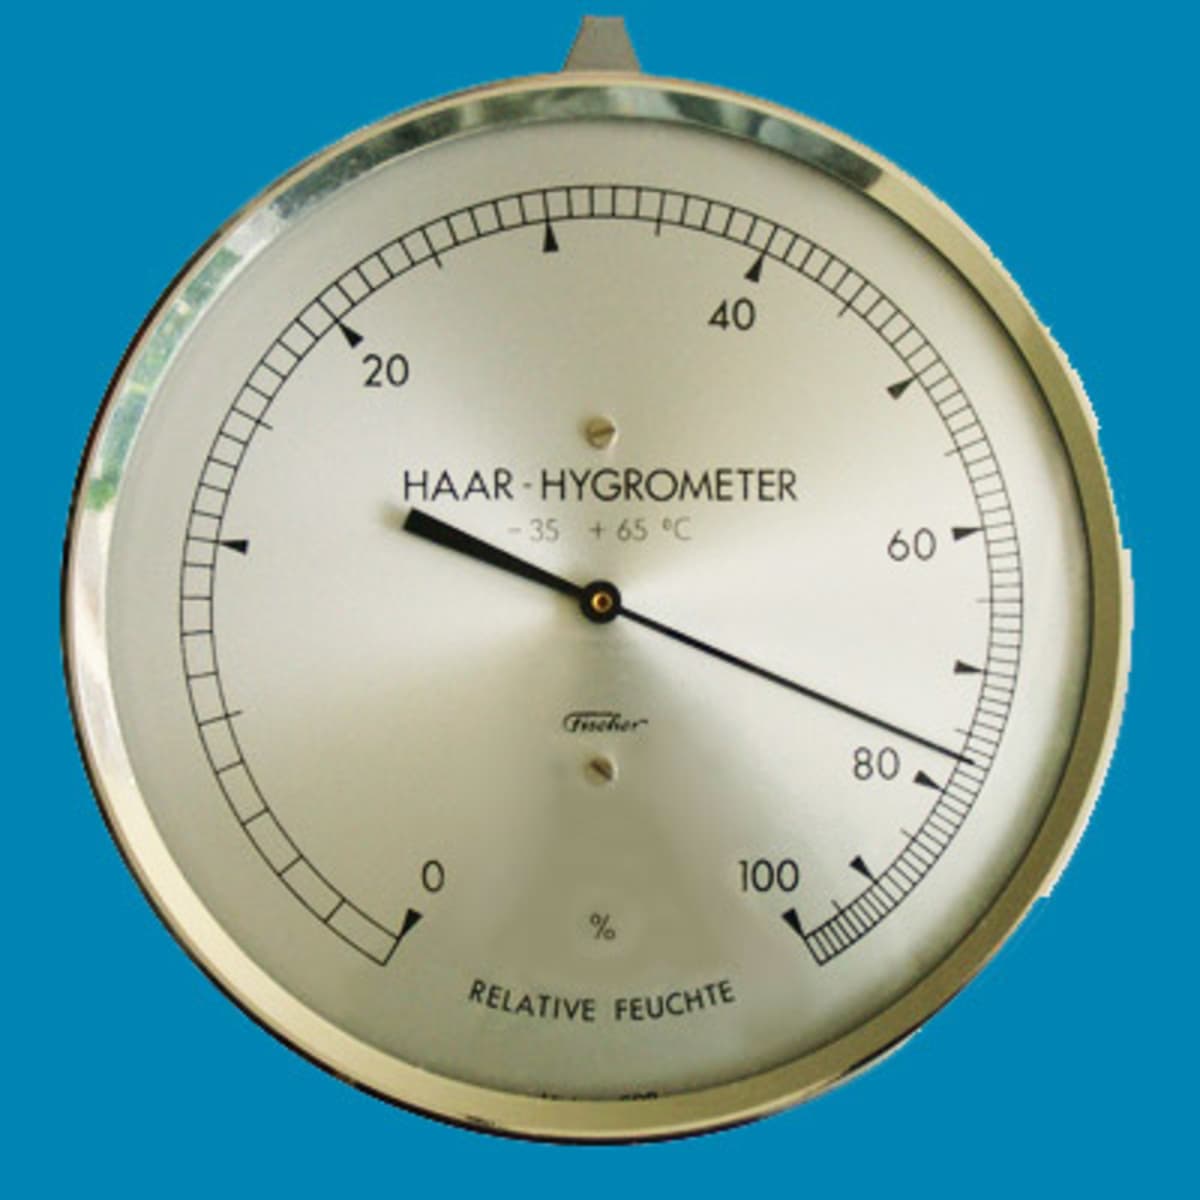 Understanding Common Terminology Used with Hygrometers 